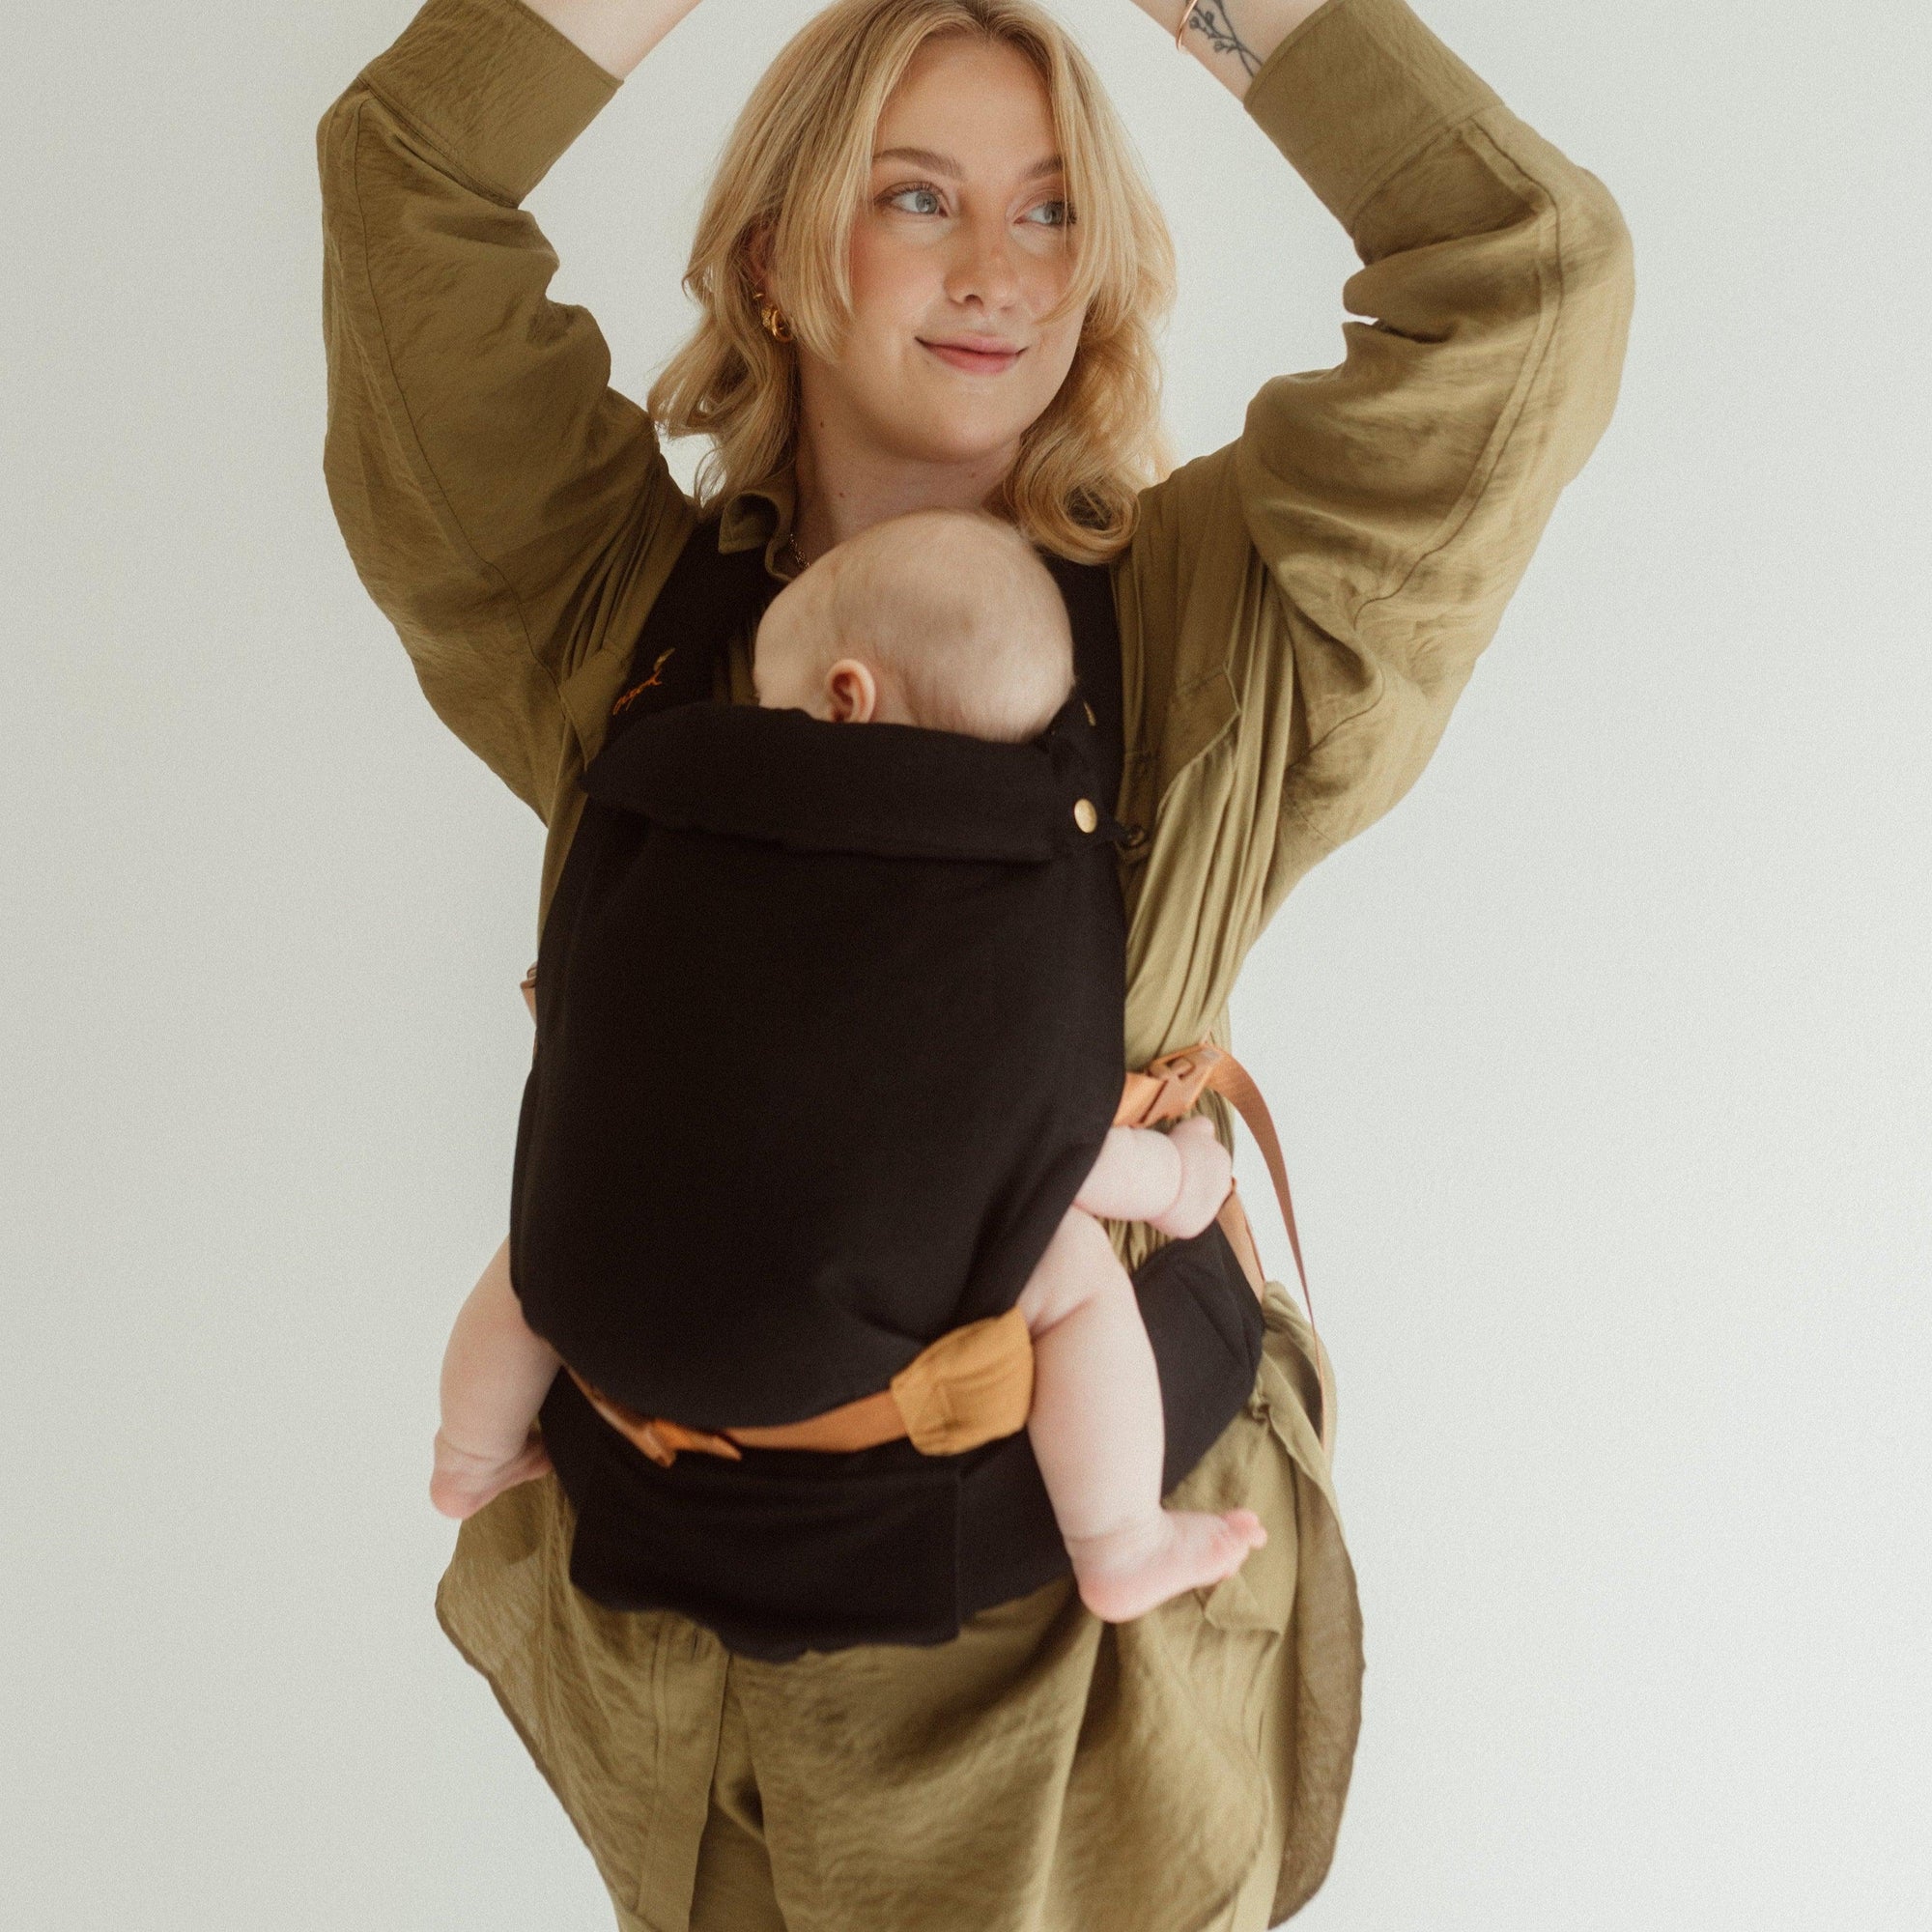 A woman wearing a Cinta Clip Carrier by Chekoh, carrying a baby.